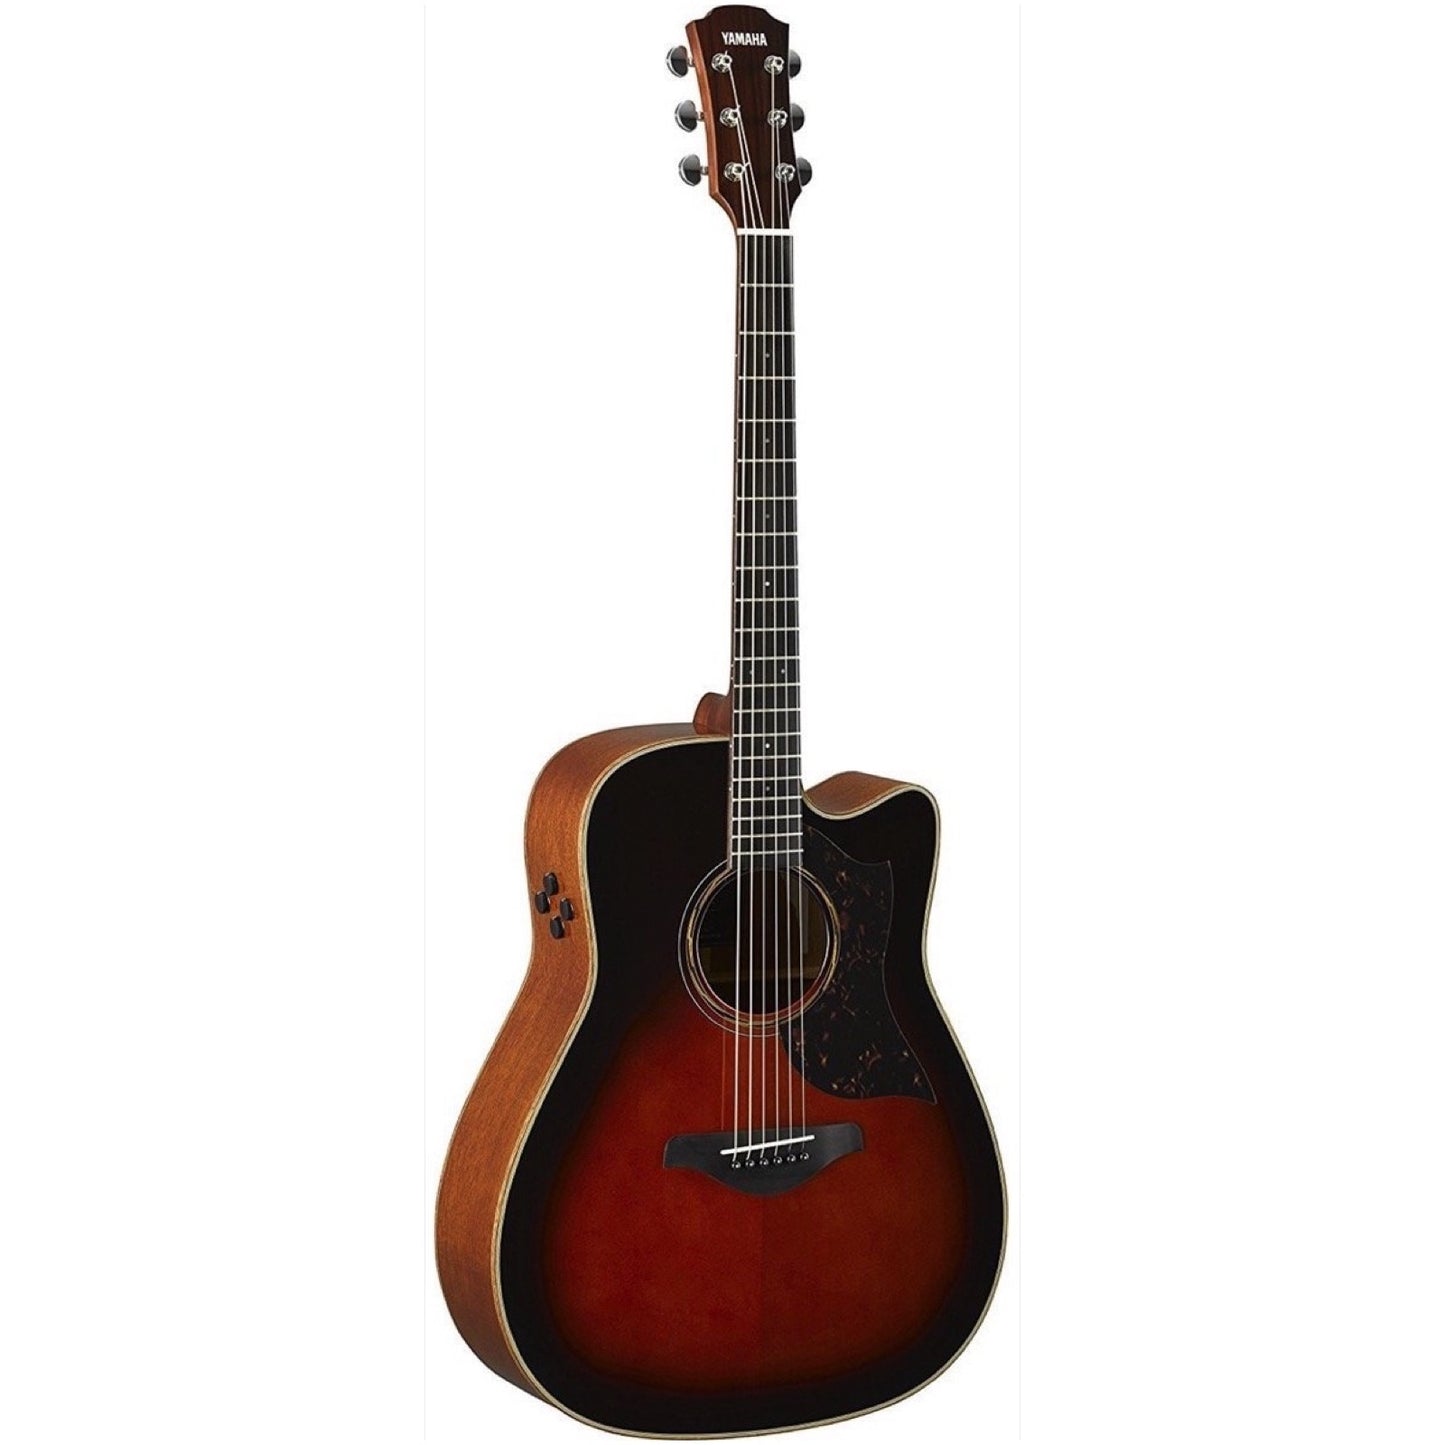 Yamaha A3M Acoustic-Electric Guitar, with Gig Bag, Tobacco Brown Sunburst